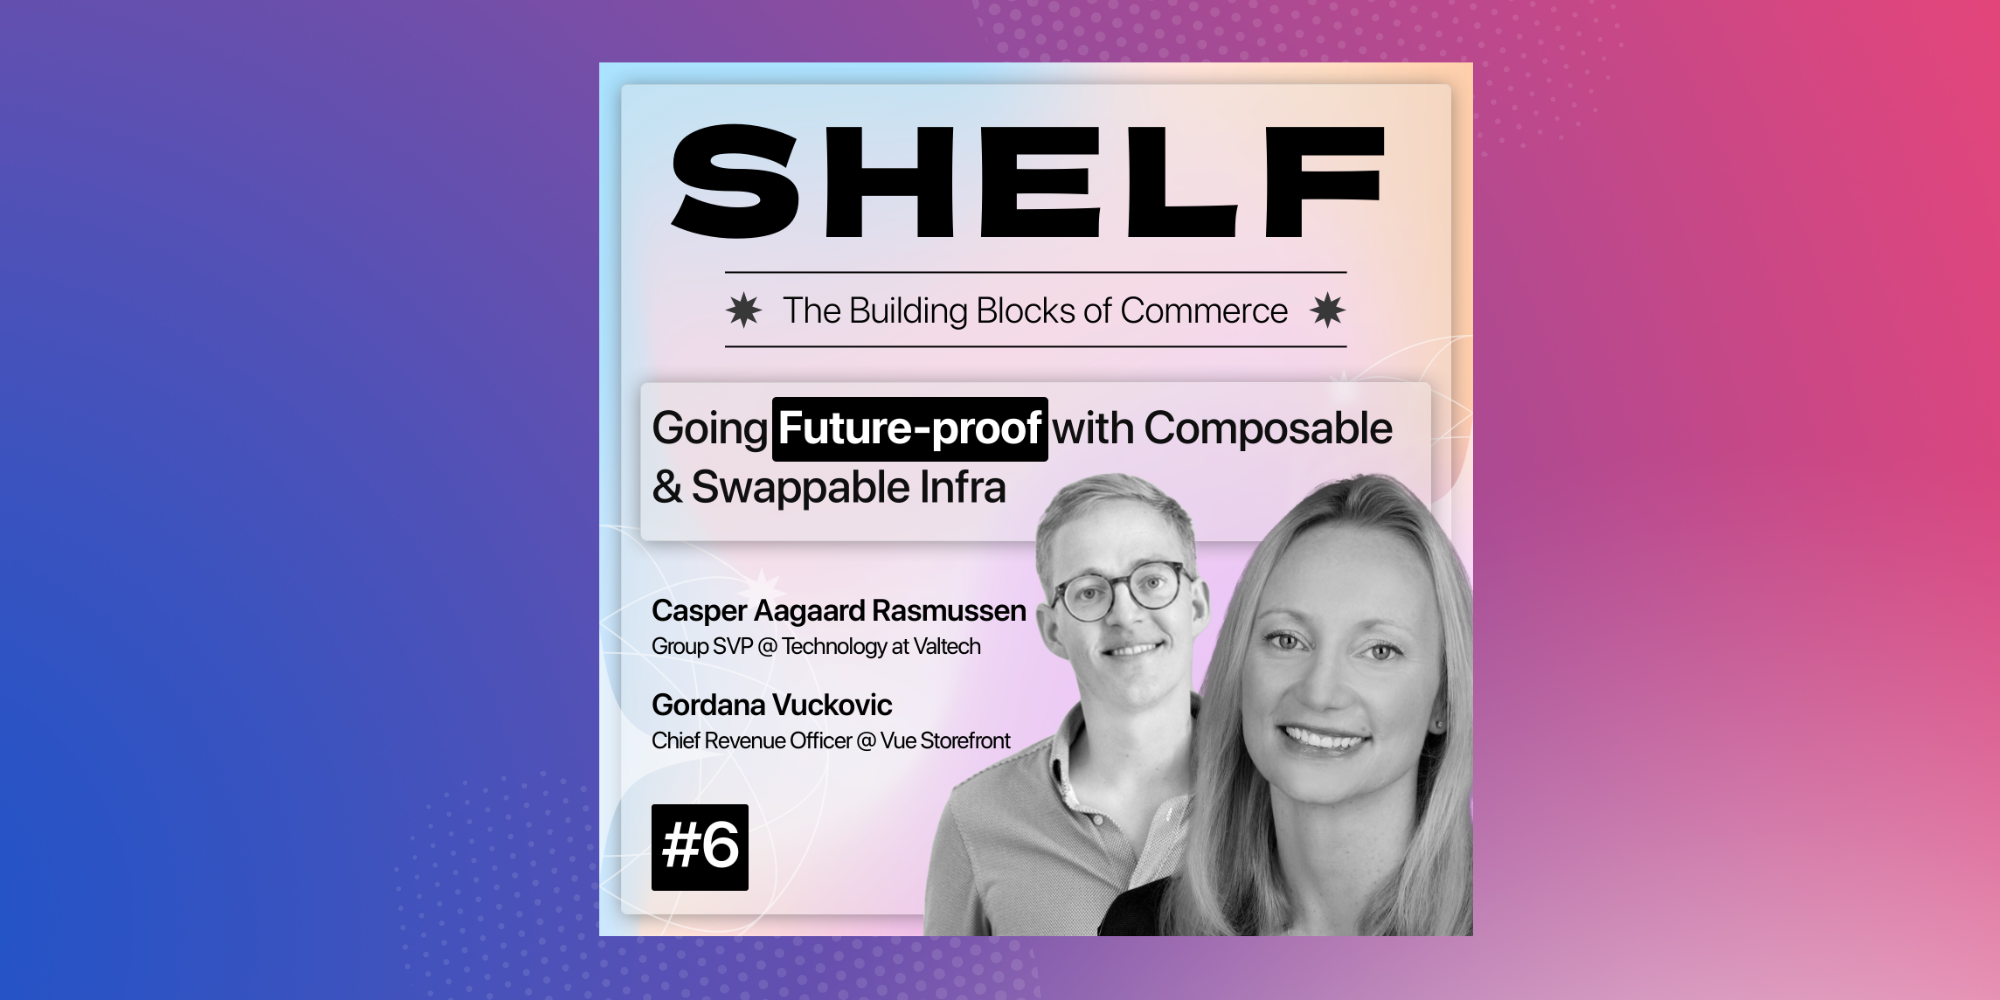 Shelf: Going Future-proof with Composable & Swappable Infra